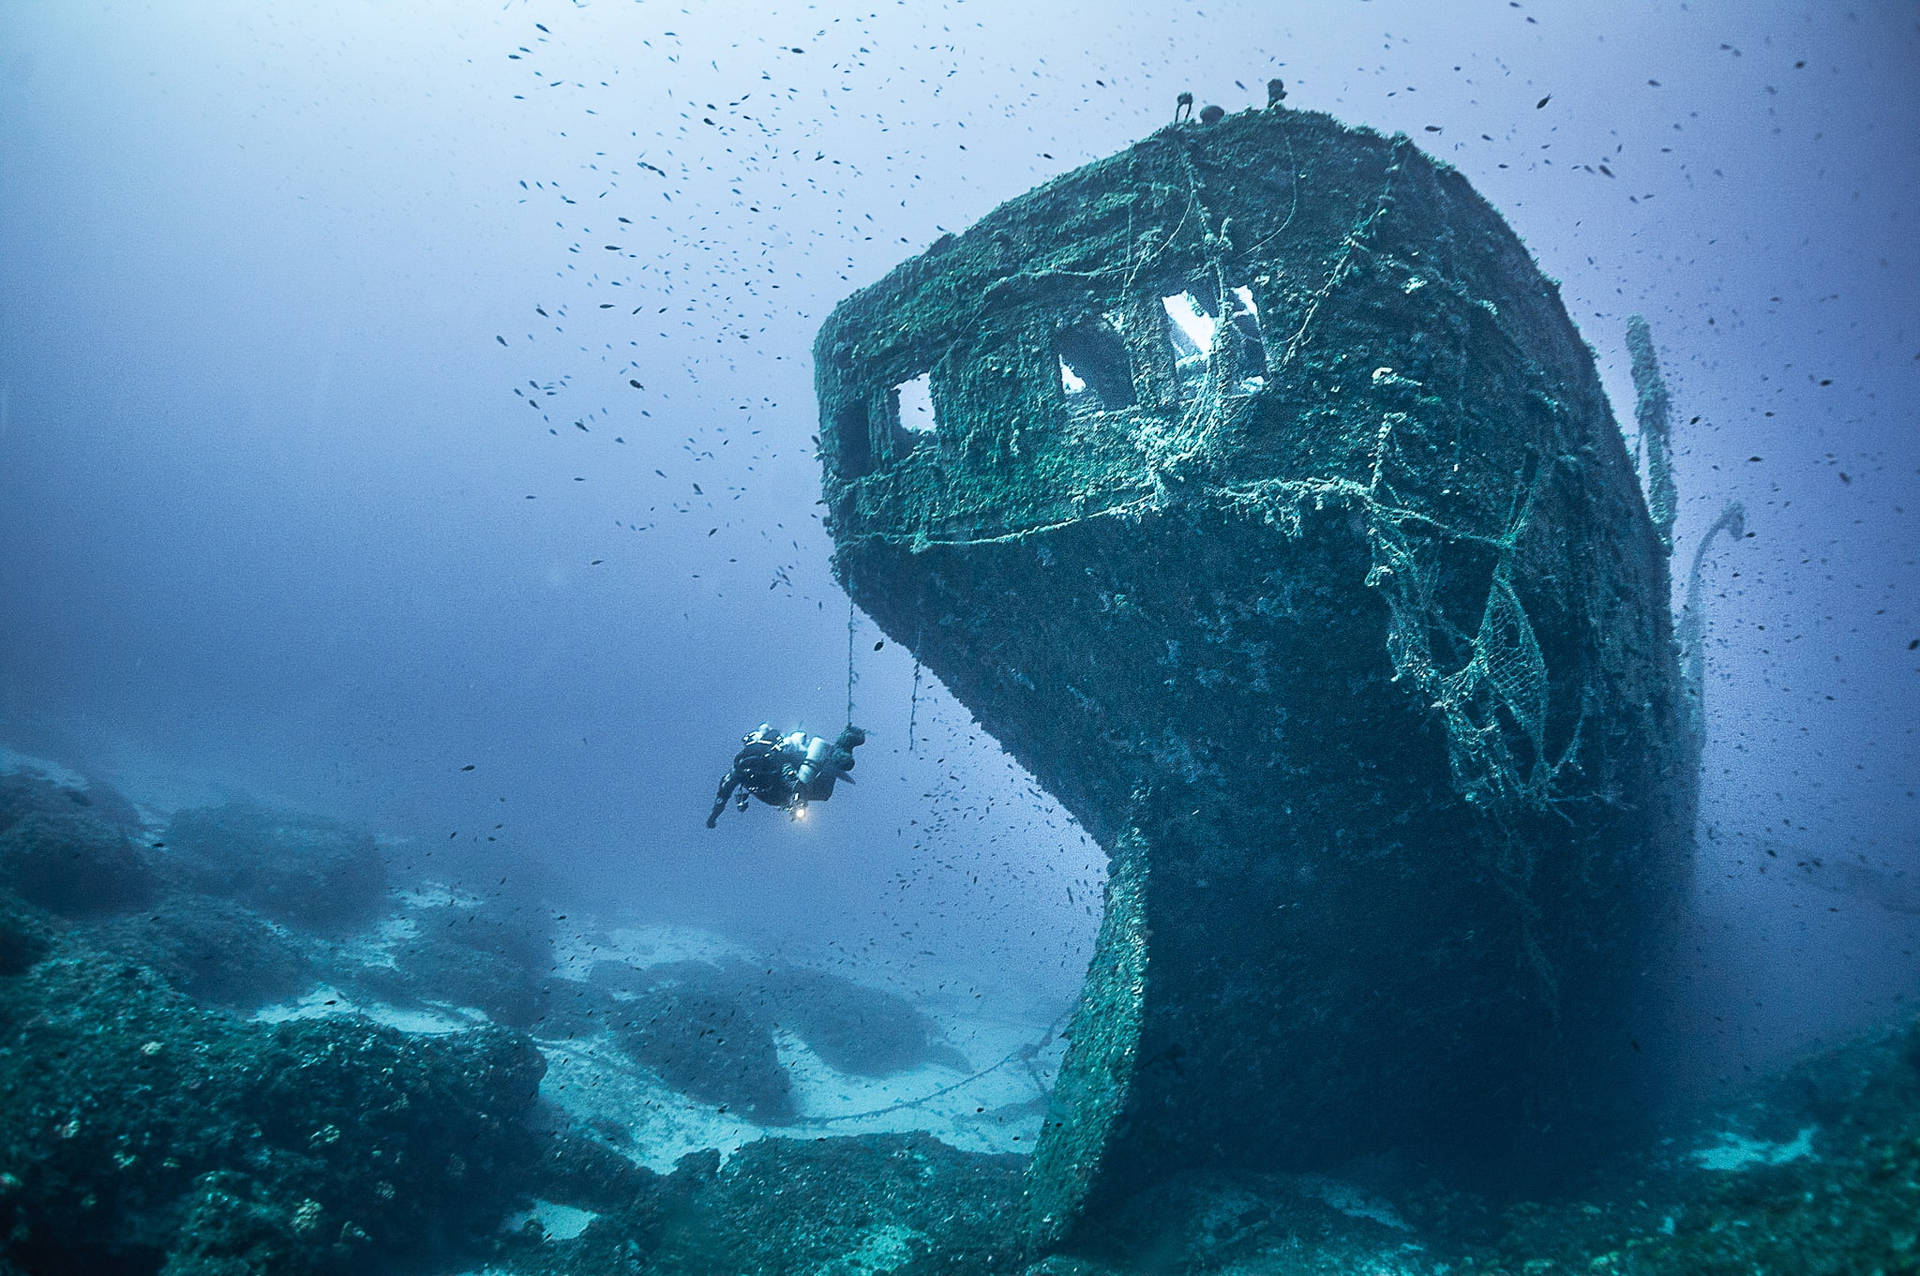 Scuba Diving Old Shipwreck Background